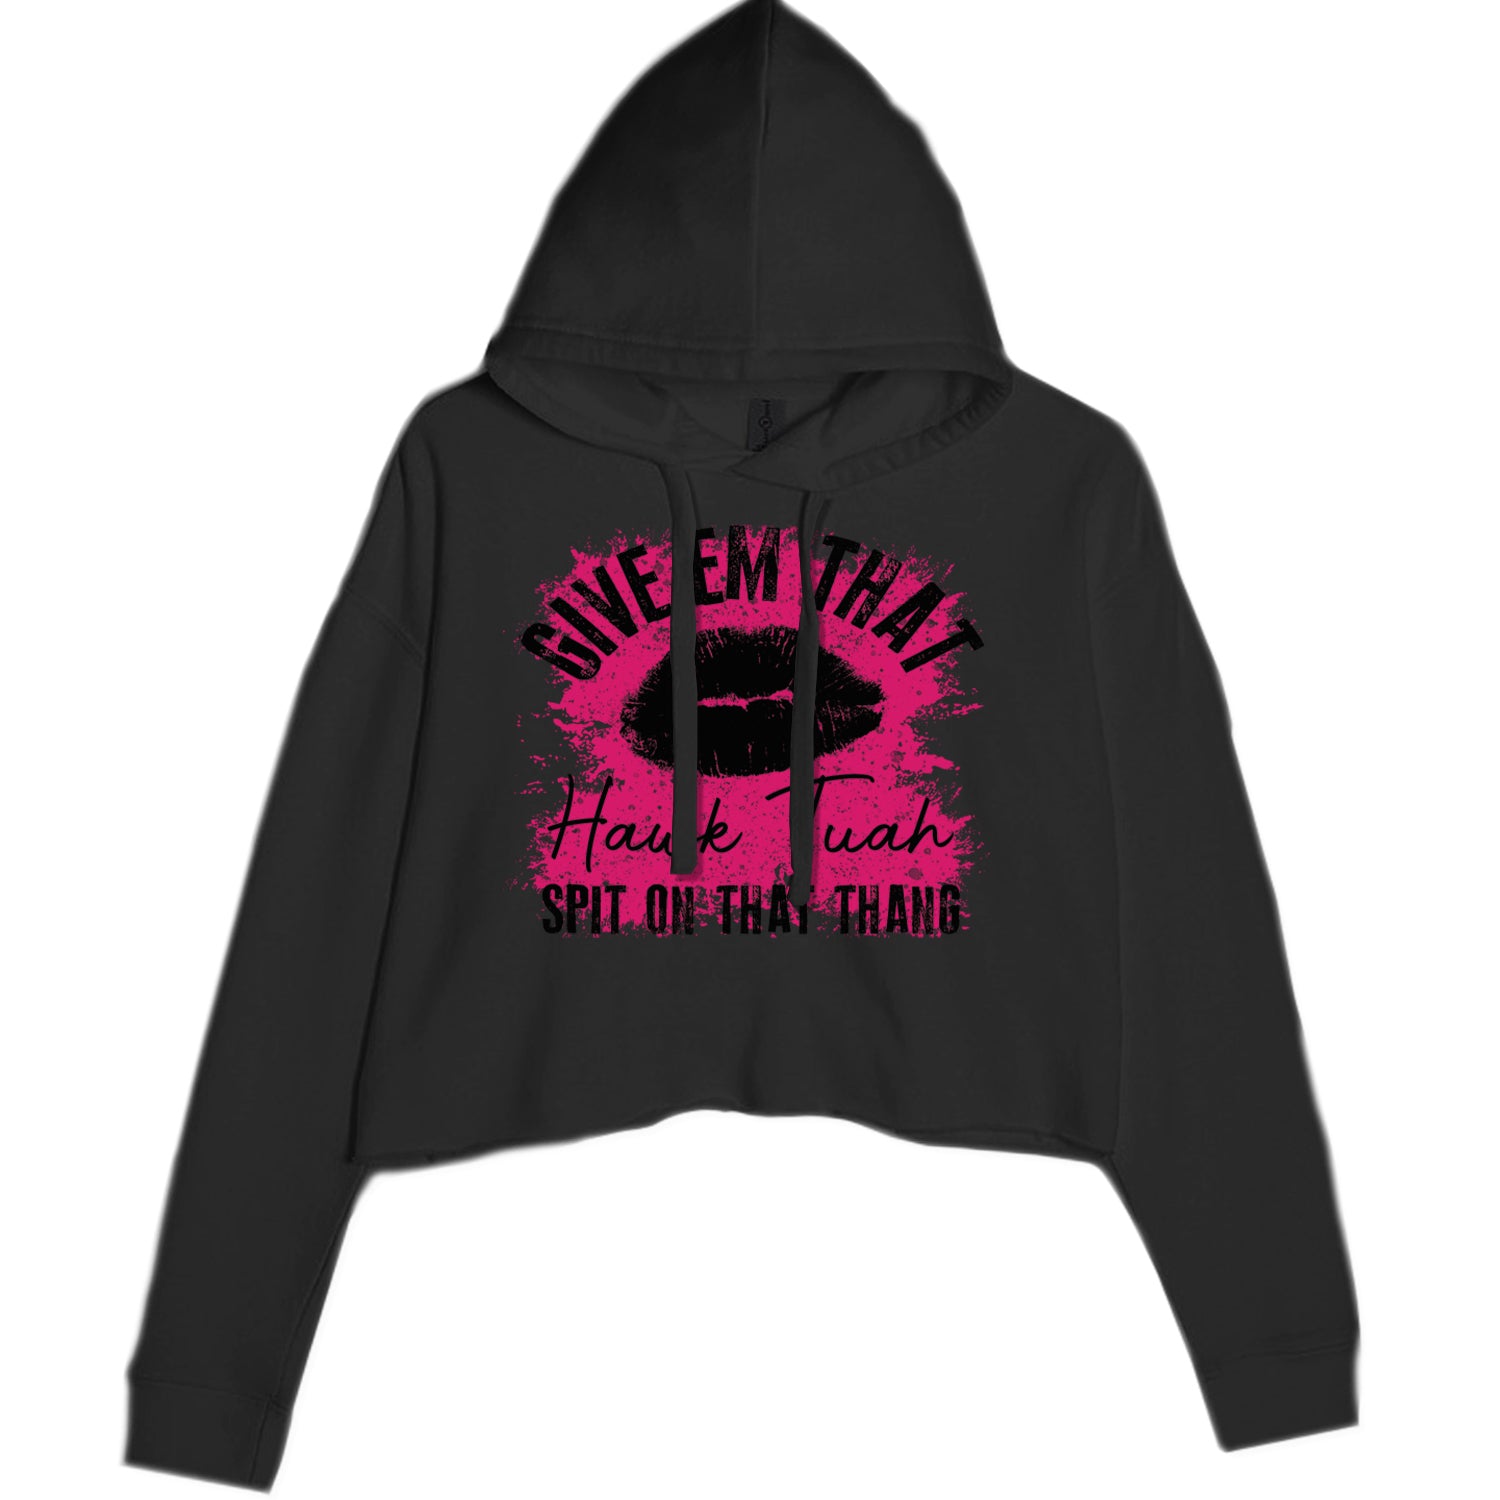 Give 'Em Hawk Tuah Spit On That Thang Cropped Hoodie Sweatshirt Lavender